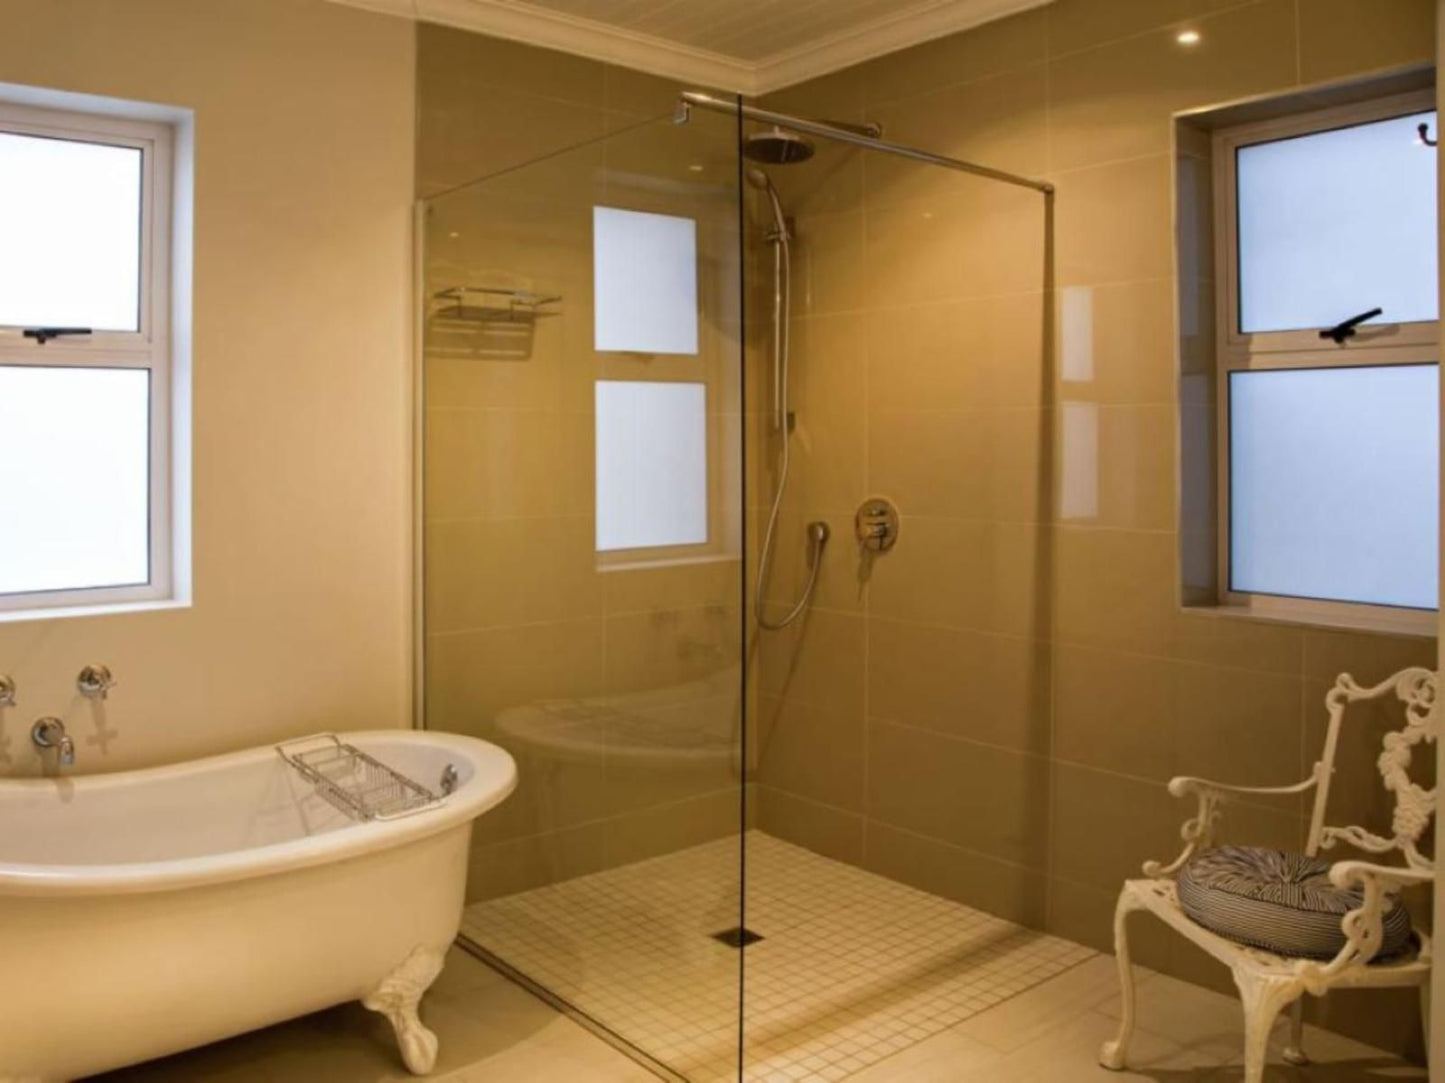 Bright On 5Th Guesthouse Summerstrand Port Elizabeth Eastern Cape South Africa Bathroom